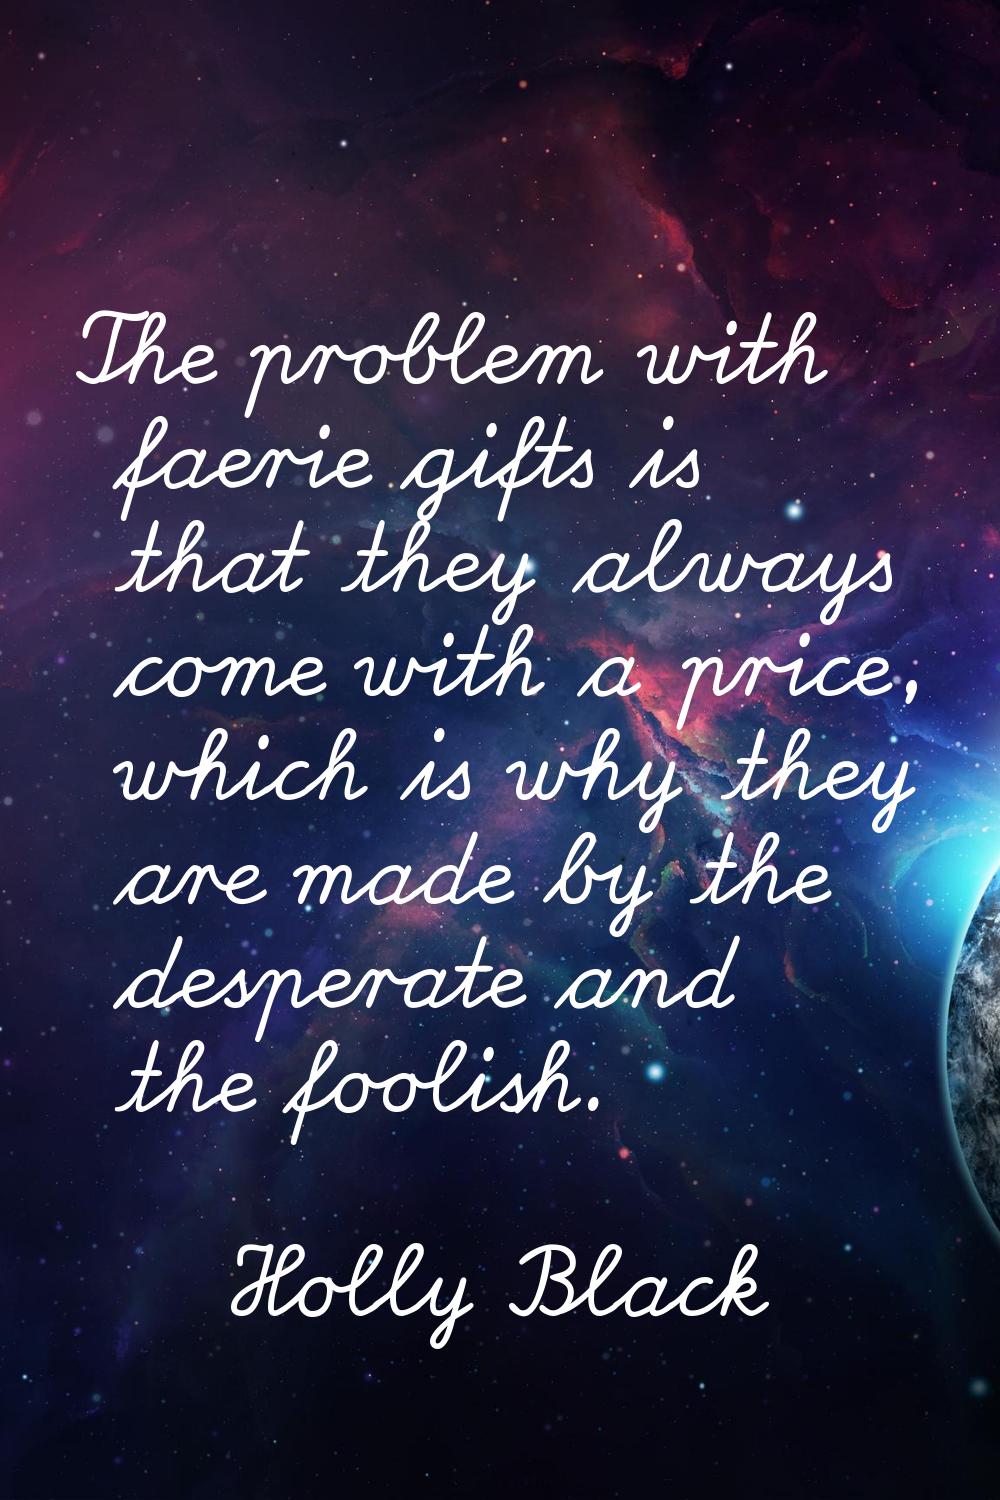 The problem with faerie gifts is that they always come with a price, which is why they are made by 